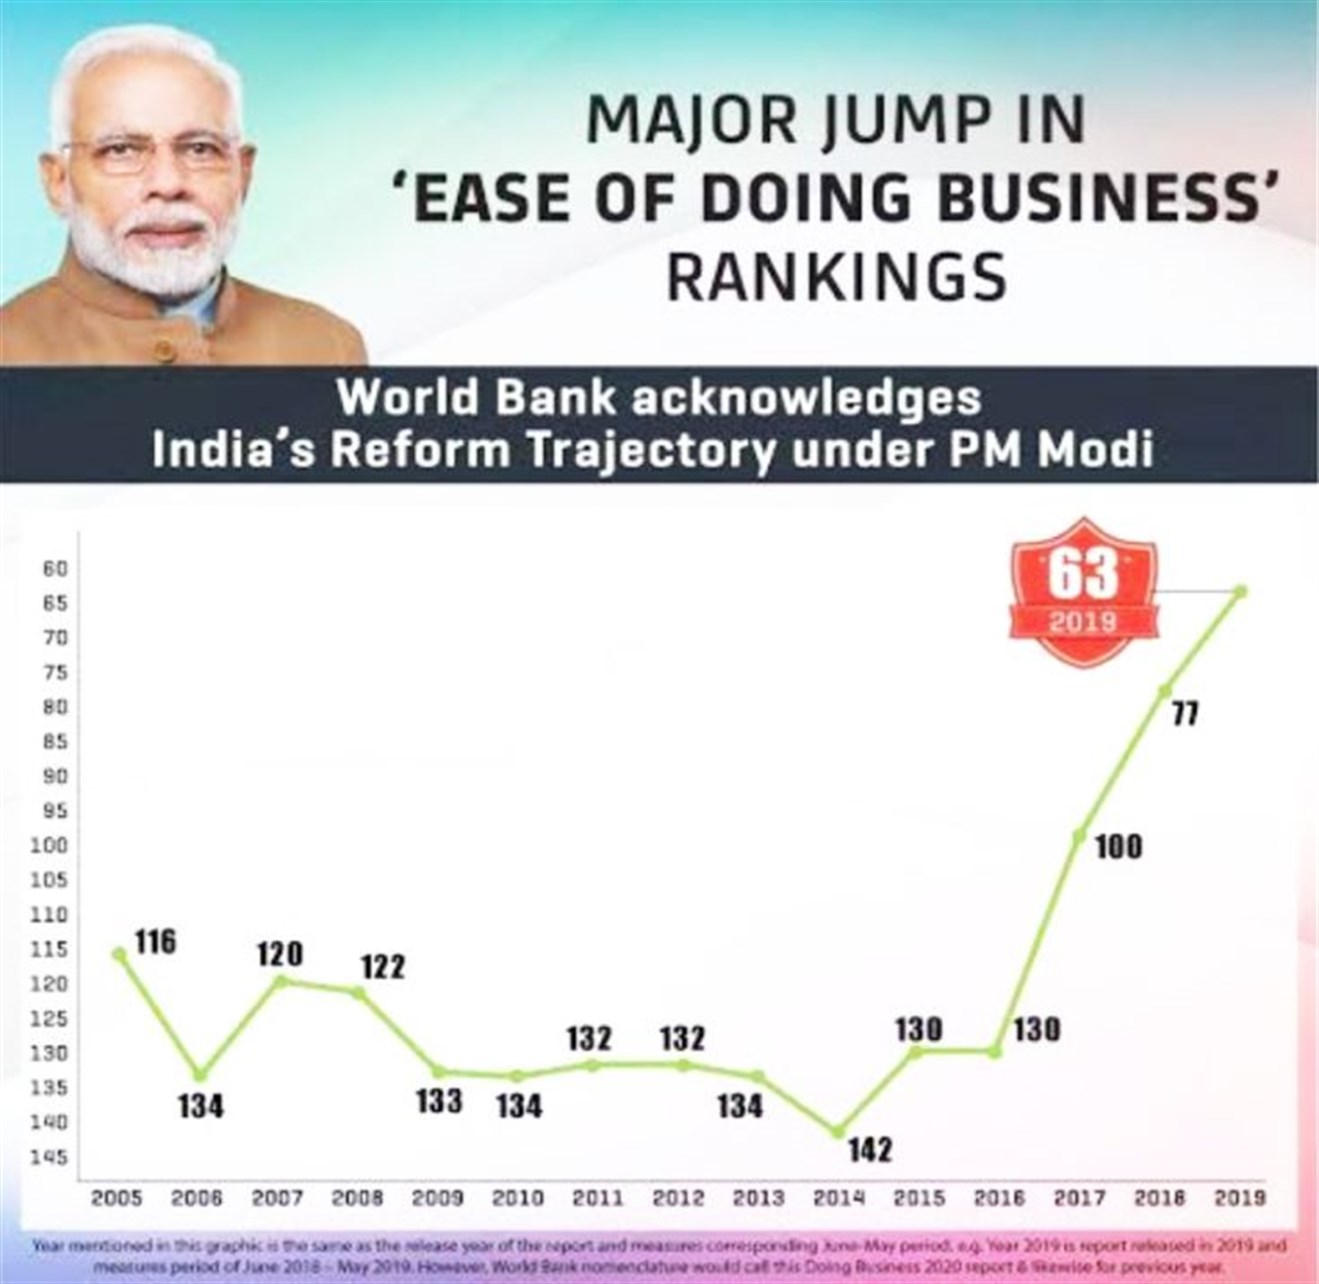 India moves up 14 spots to 63 on World Bank’s Ease of Doing Business ranking